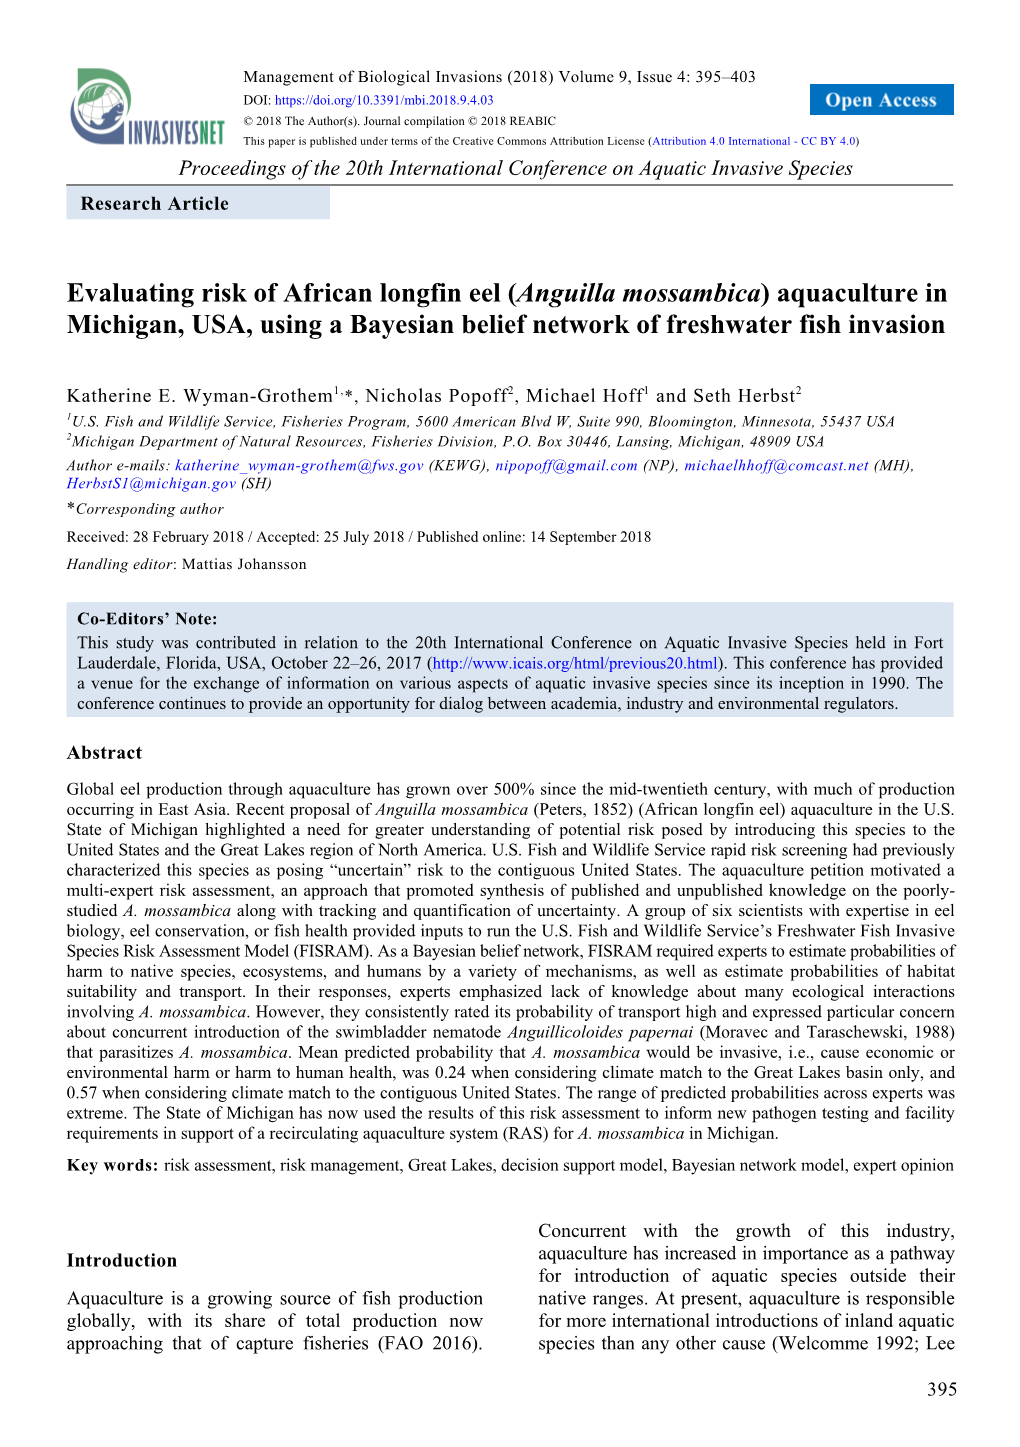 Evaluating Risk of African Longfin Eel (Anguilla Mossambica) Aquaculture in Michigan, USA, Using a Bayesian Belief Network of Freshwater Fish Invasion